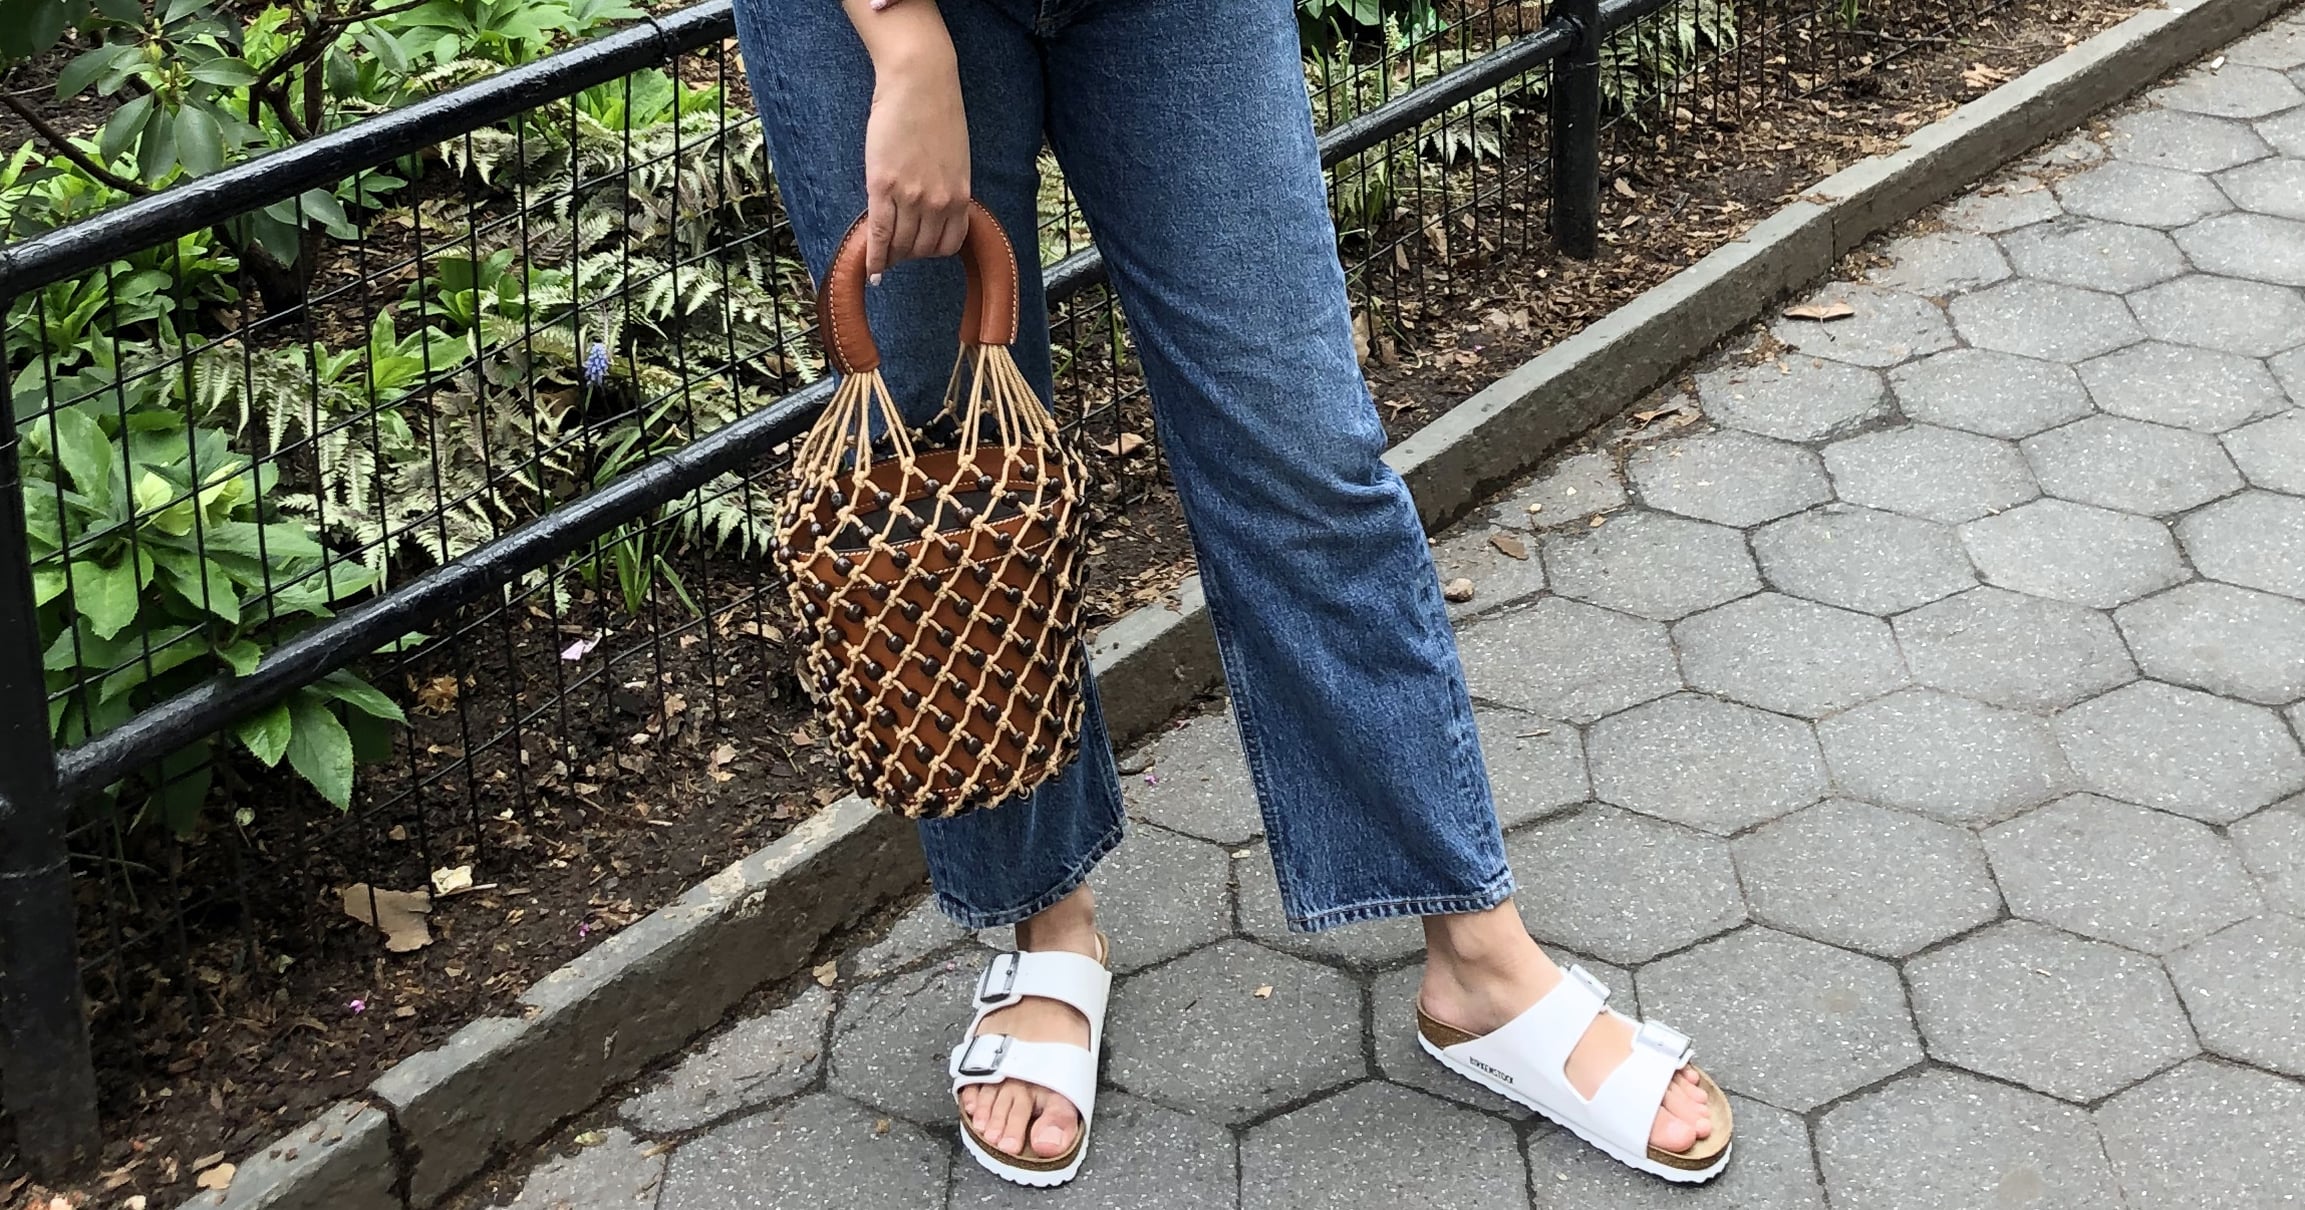 Ugly sandals are trending for Spring/Summer 2019